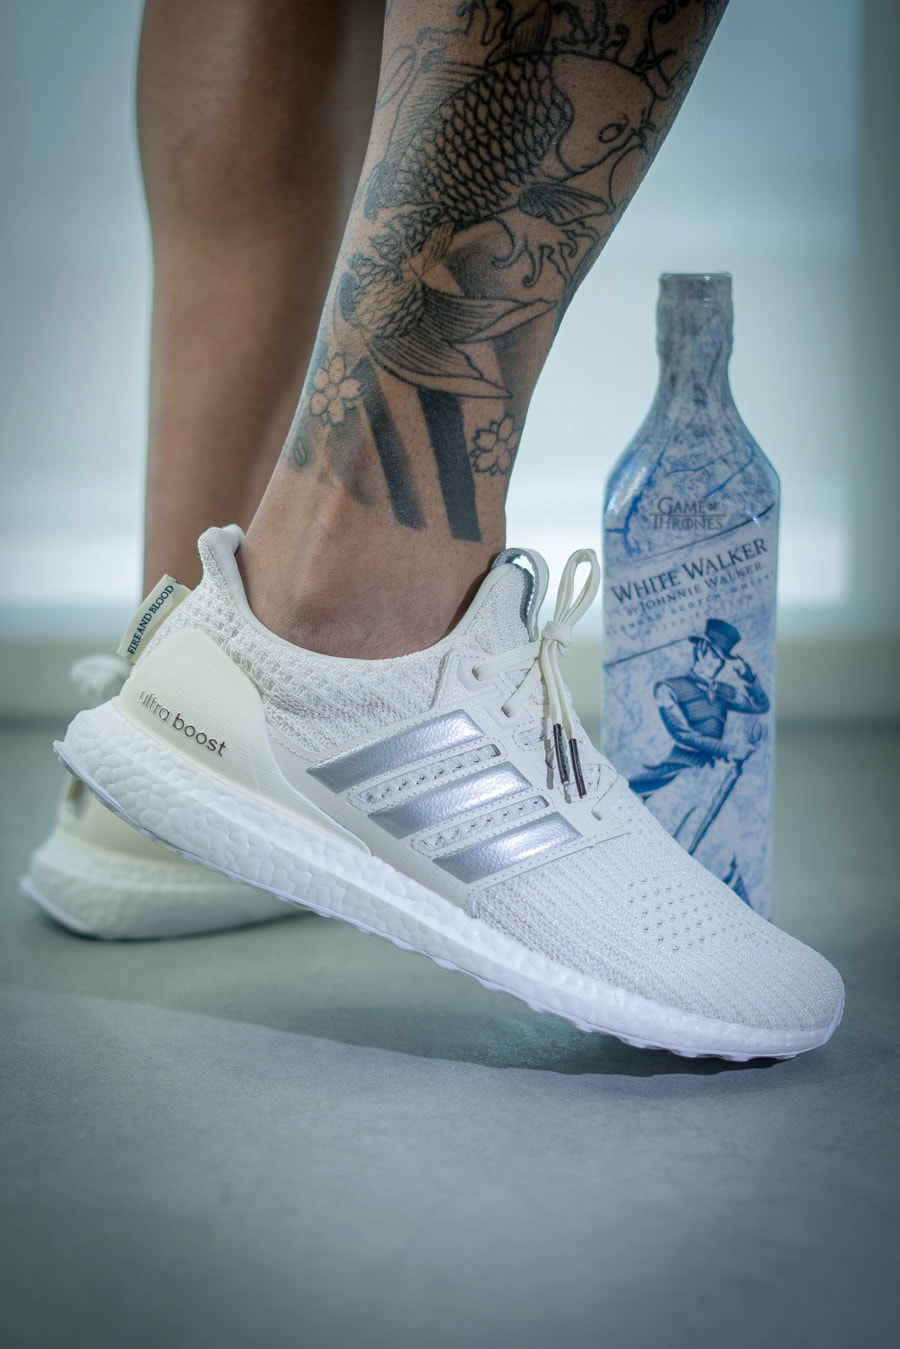 Game of adidas UltraBOOST On-Foot | Hypebeast